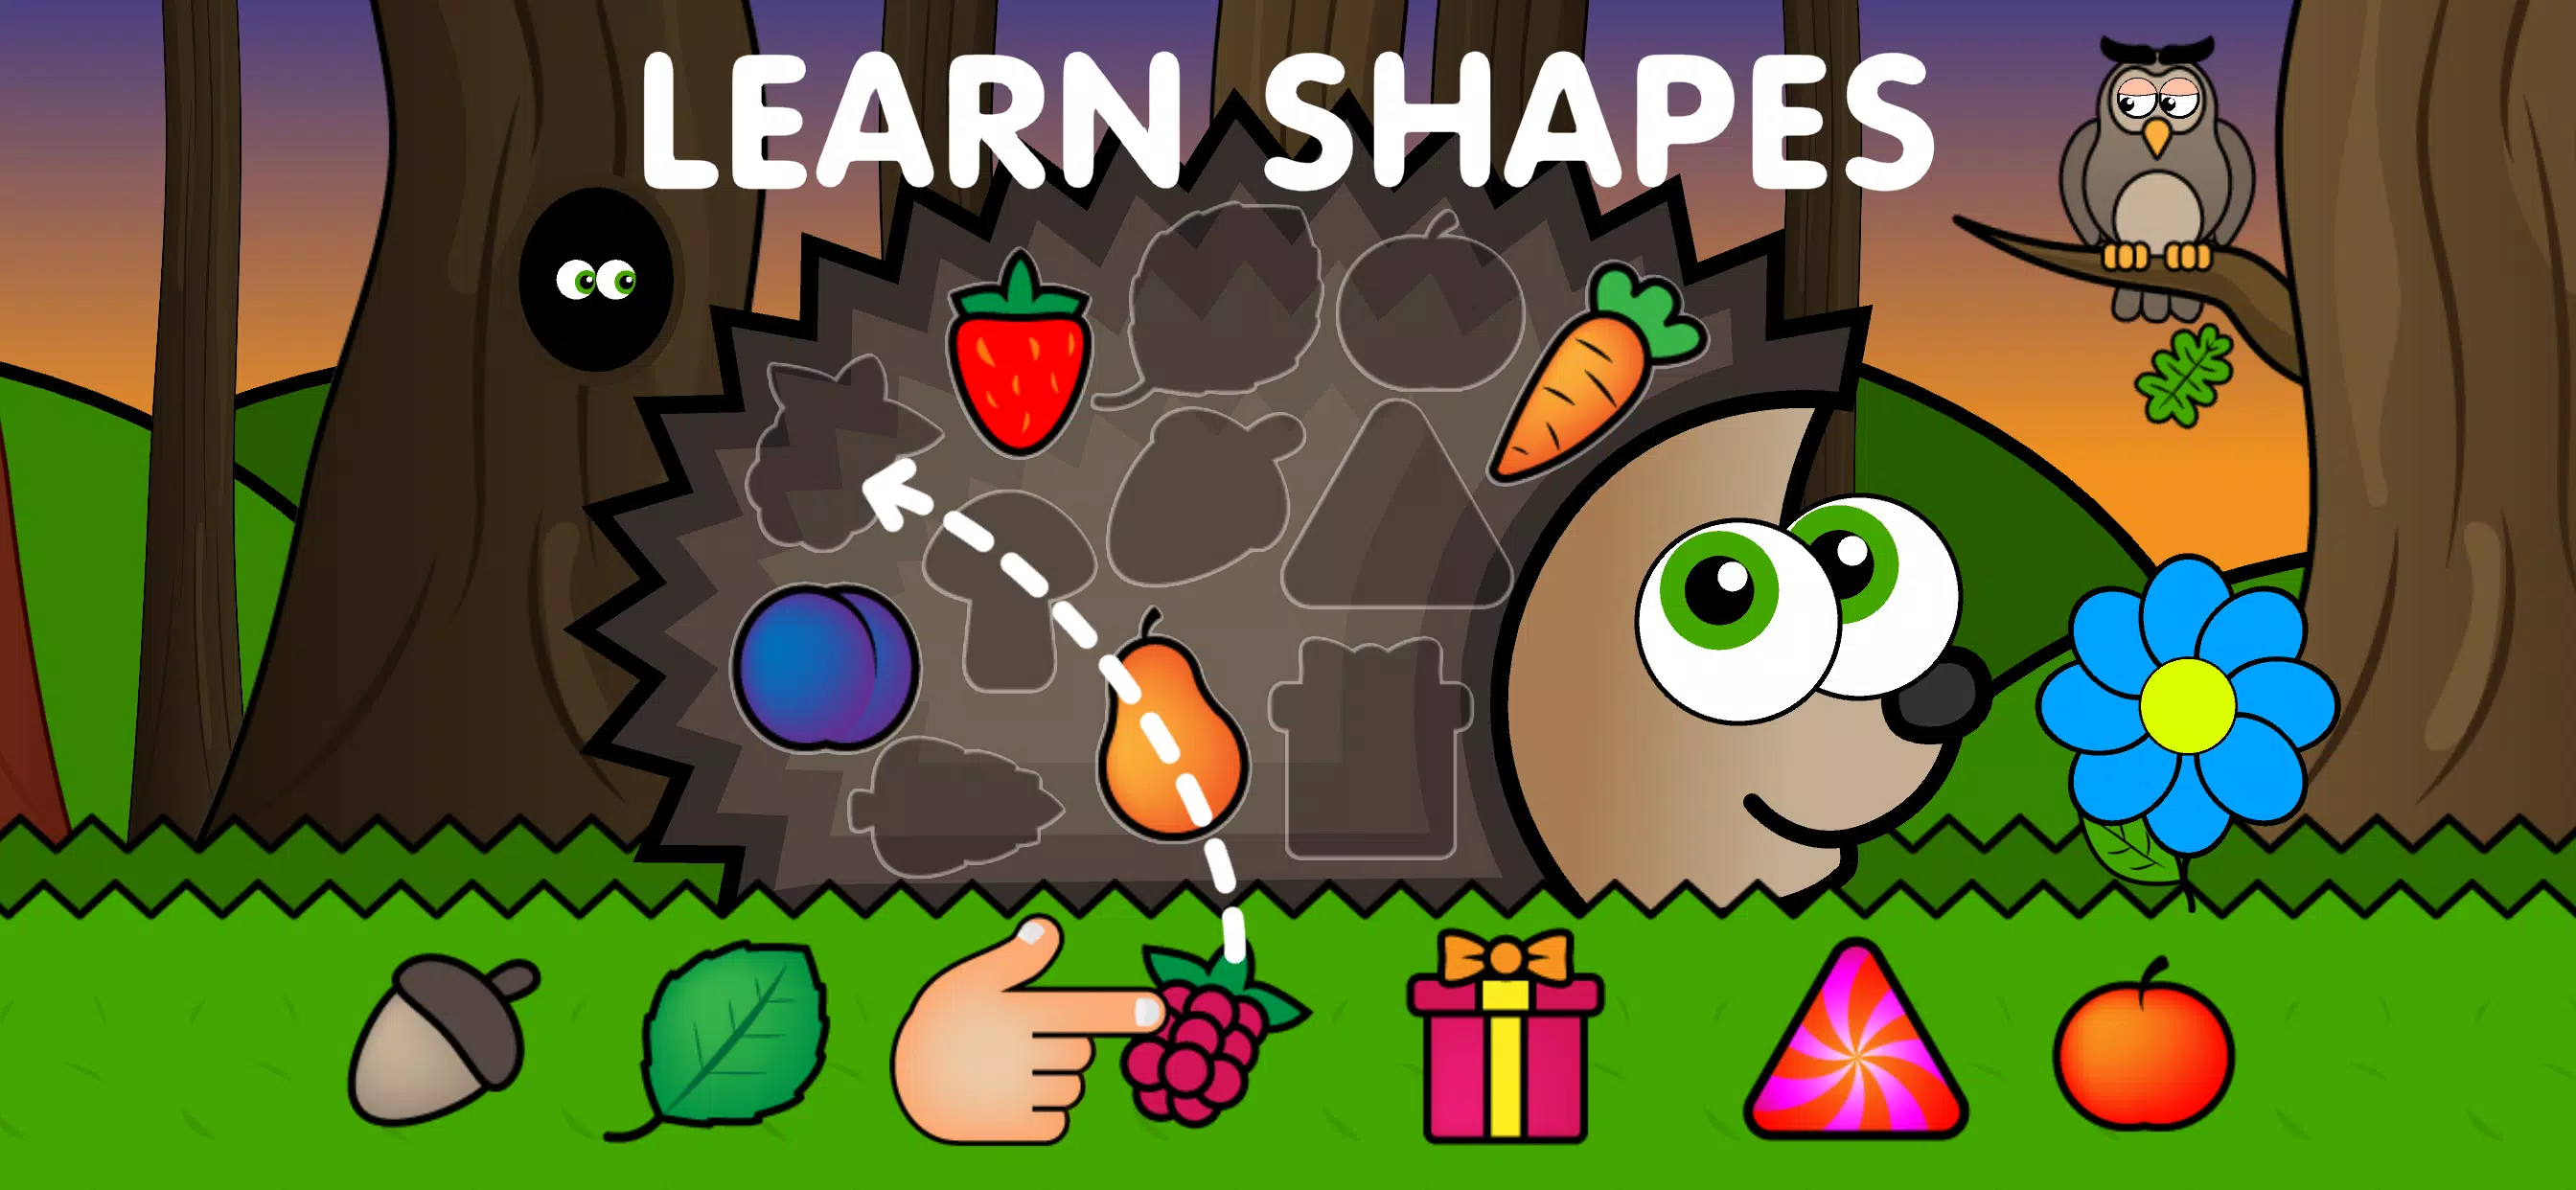 Easy games for kids 2,3,4 year old - Download the Free Educational Game